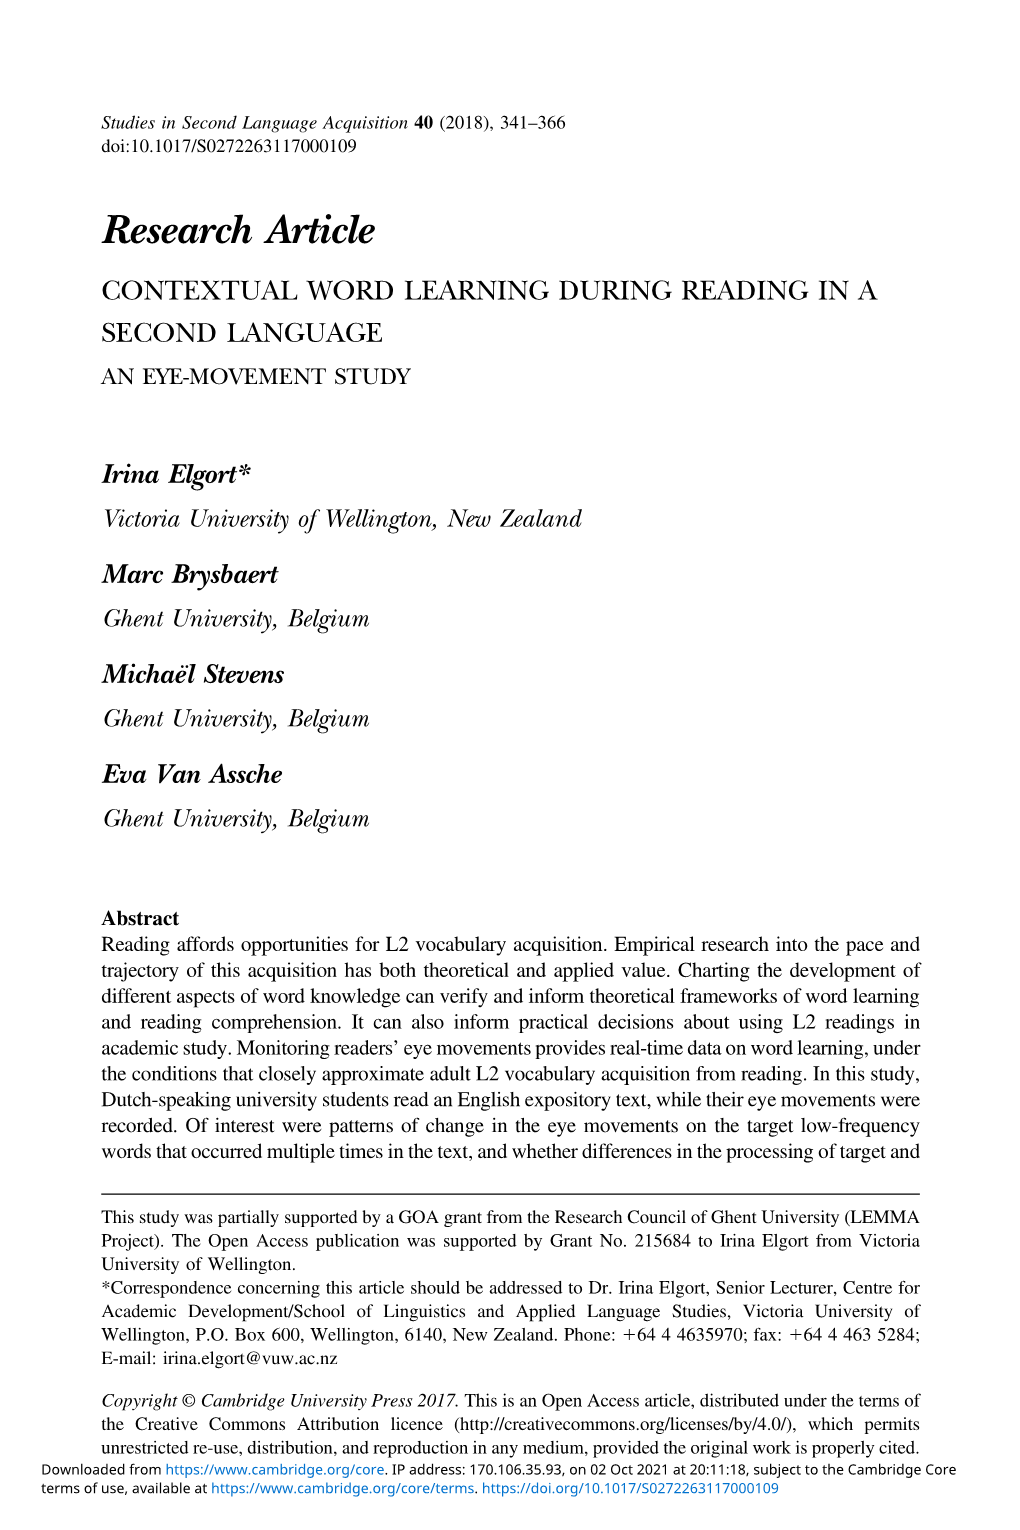 Research Article CONTEXTUAL WORD LEARNING DURING READING in a SECOND LANGUAGE an EYE-MOVEMENT STUDY